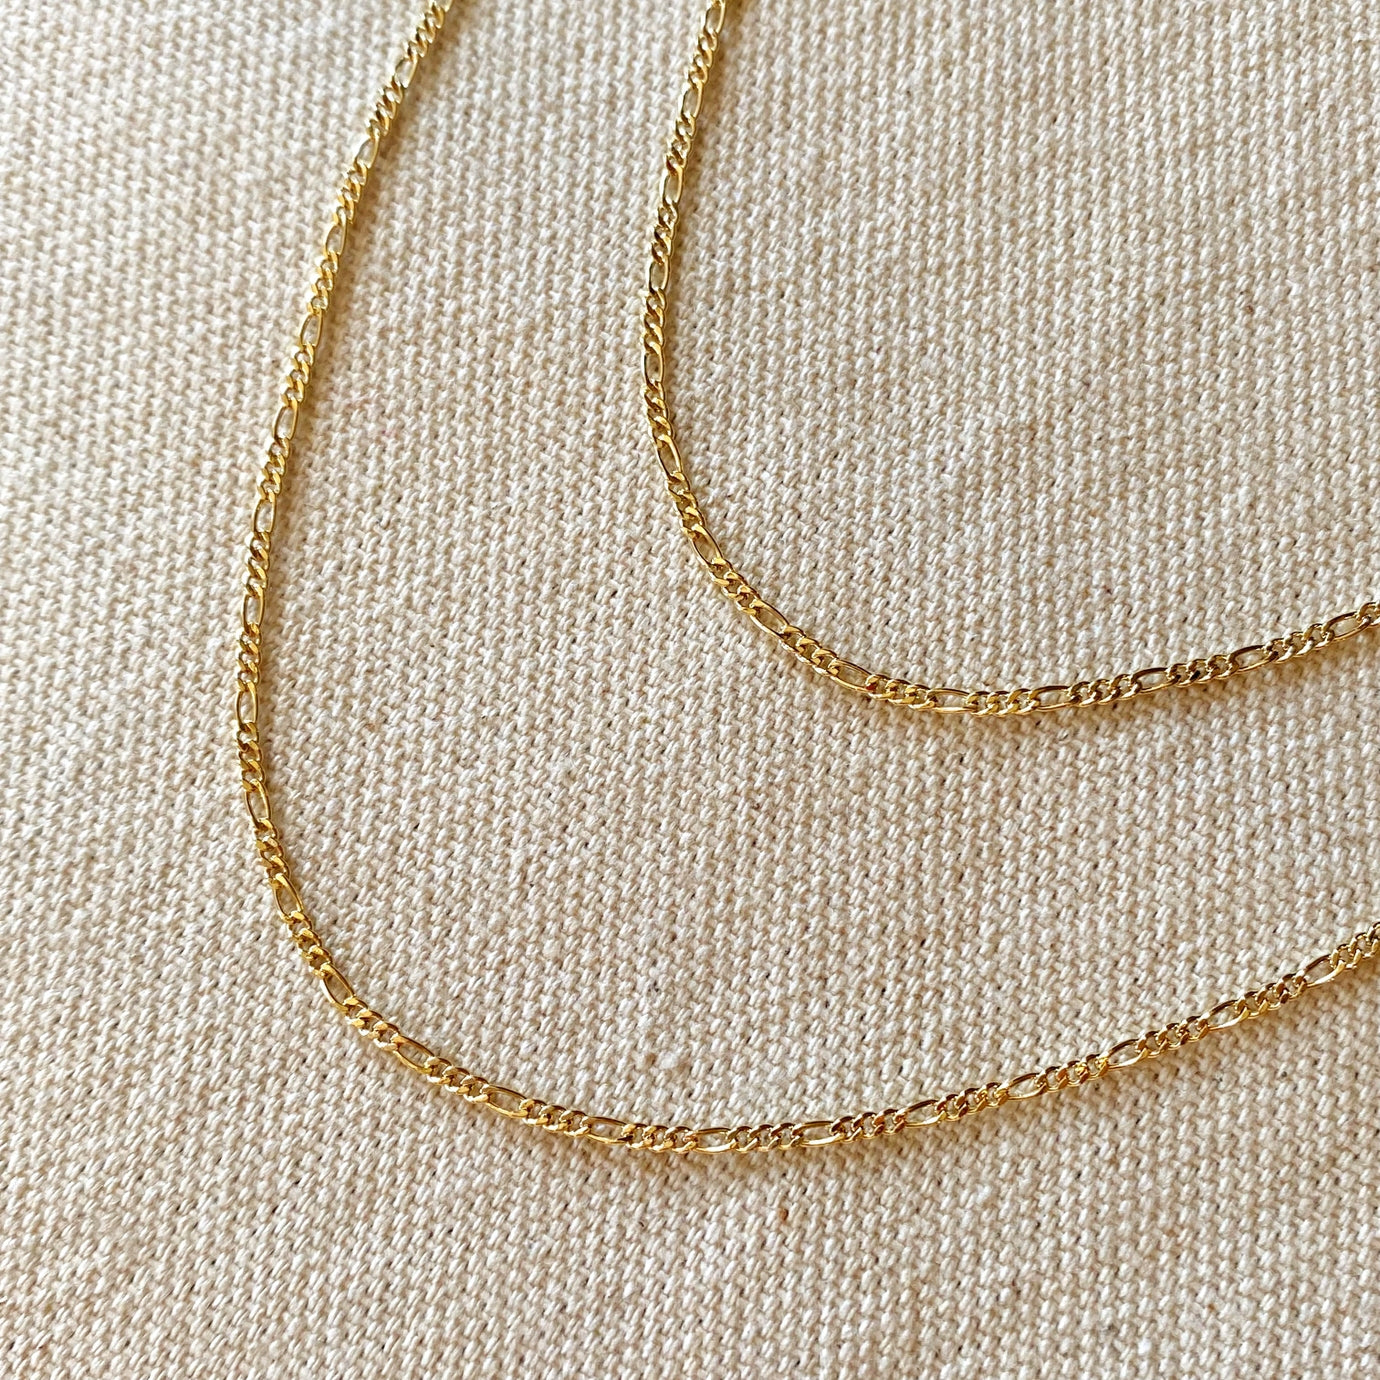 Thin Figaro Chain, 18k Gold Filled